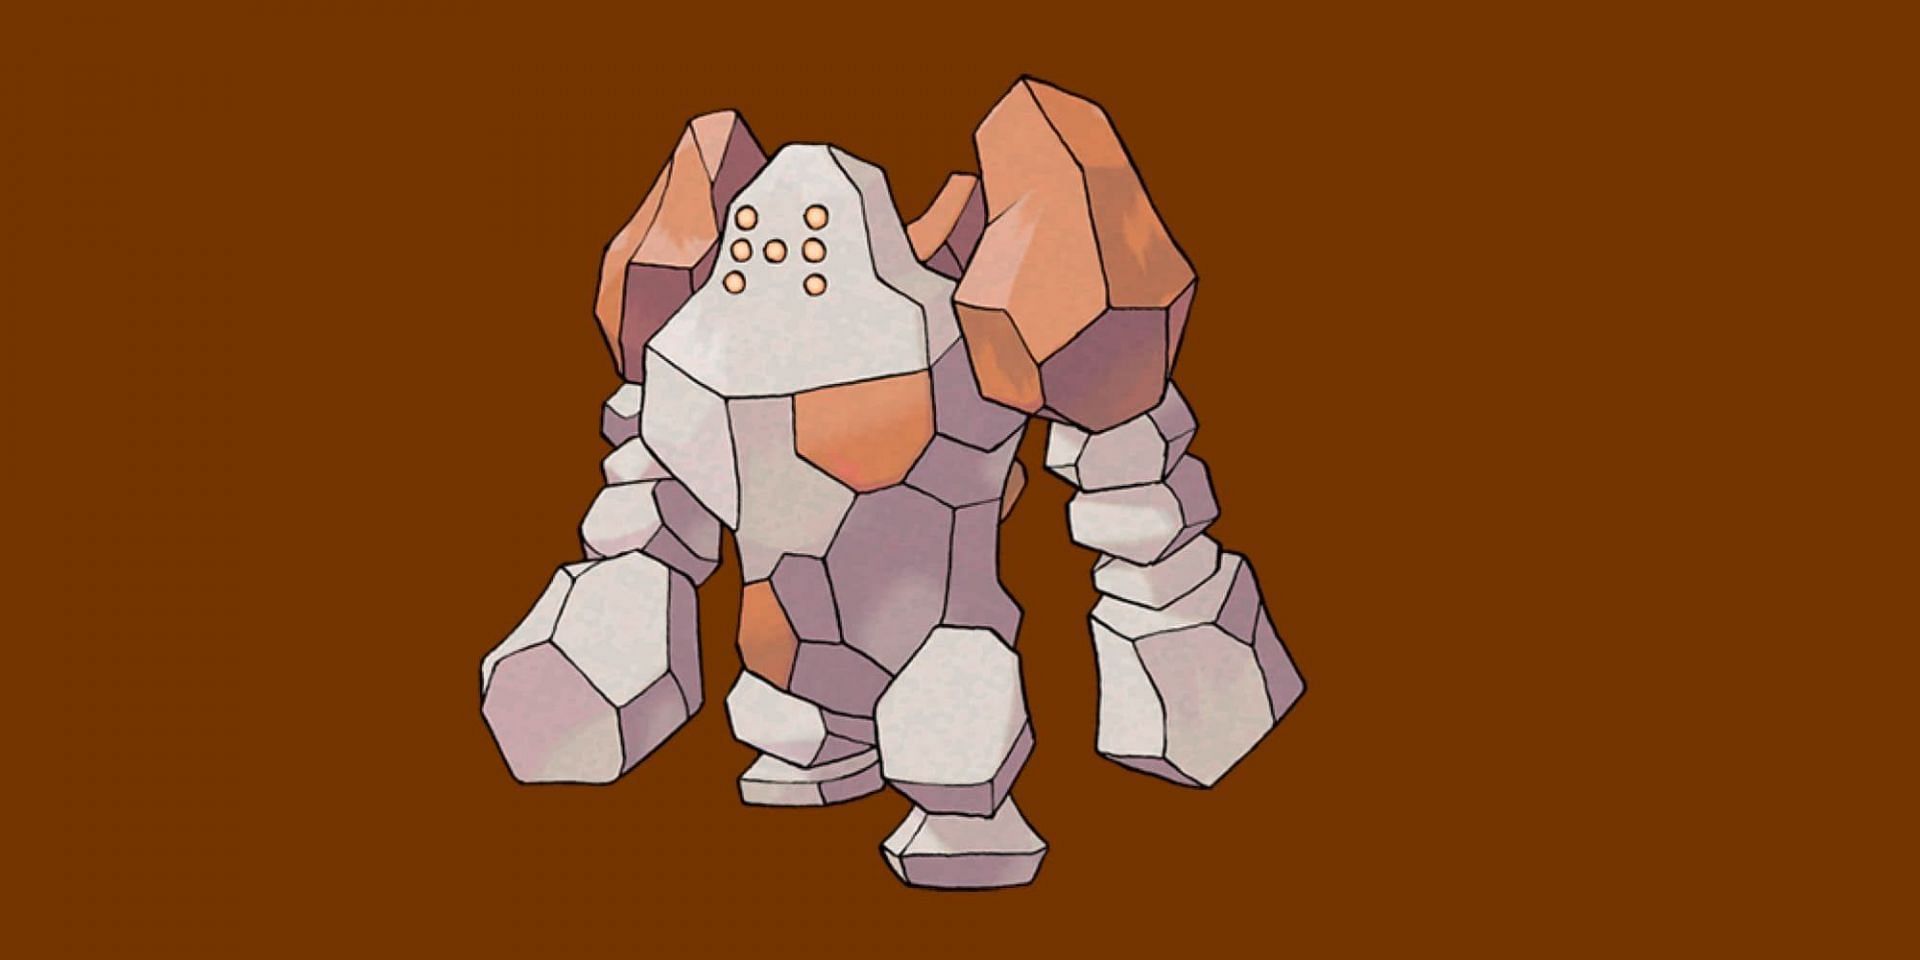 Official artwork for Regirock used throughout the Pokemon franchise (Image via The Pokemon Company)